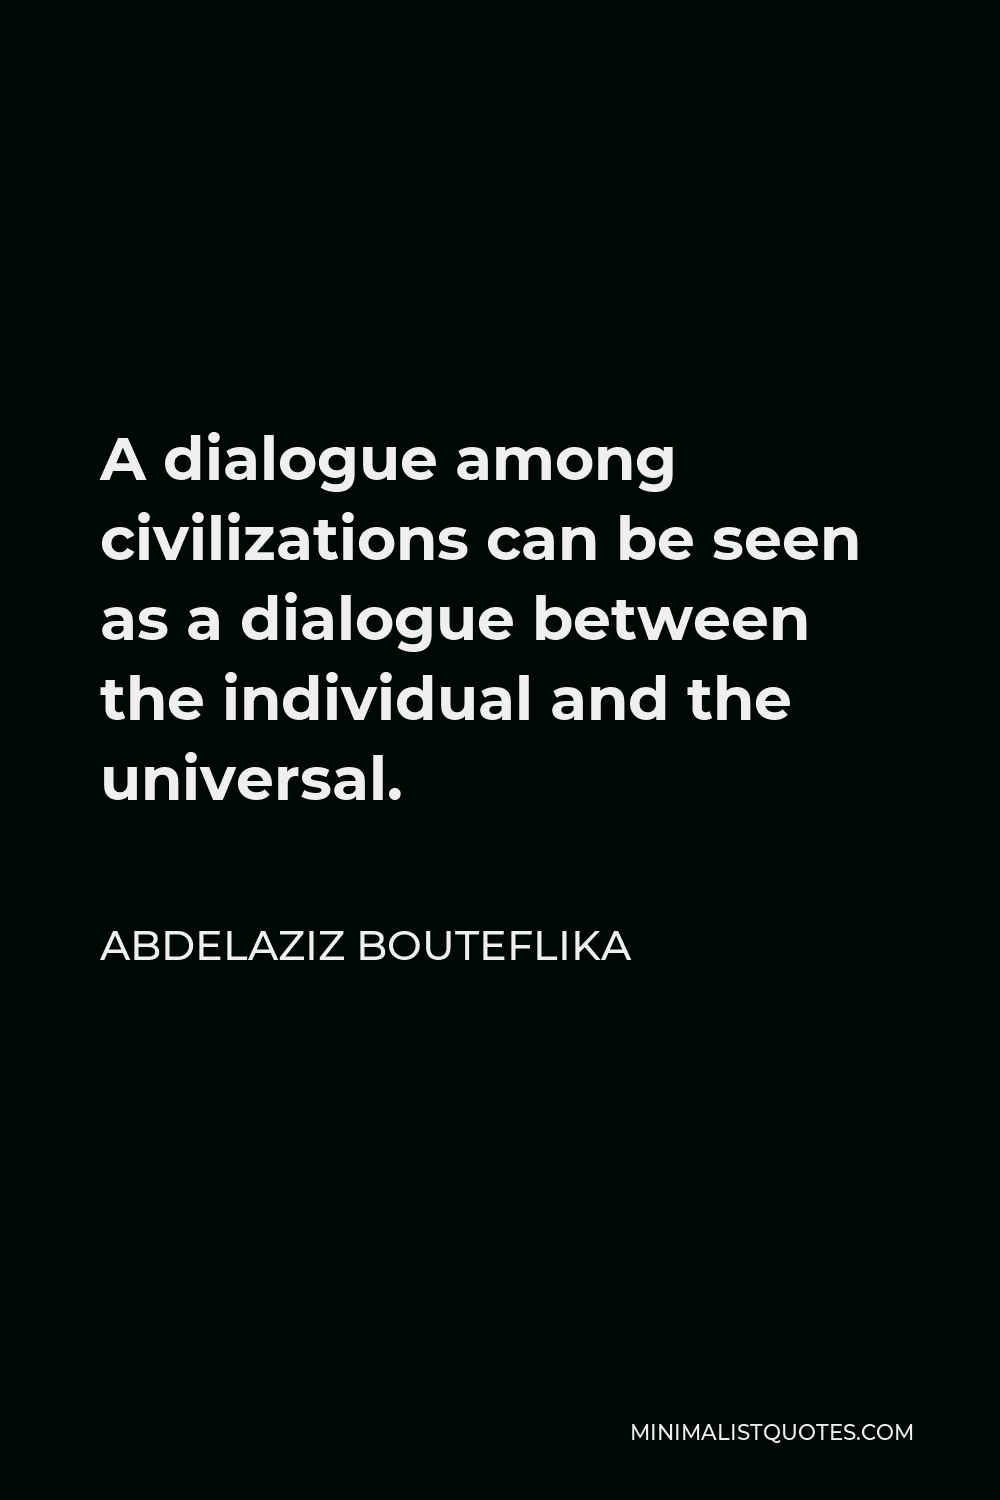 Abdelaziz Bouteflika Quote - A dialogue among civilizations can be seen as a dialogue between the individual and the universal.